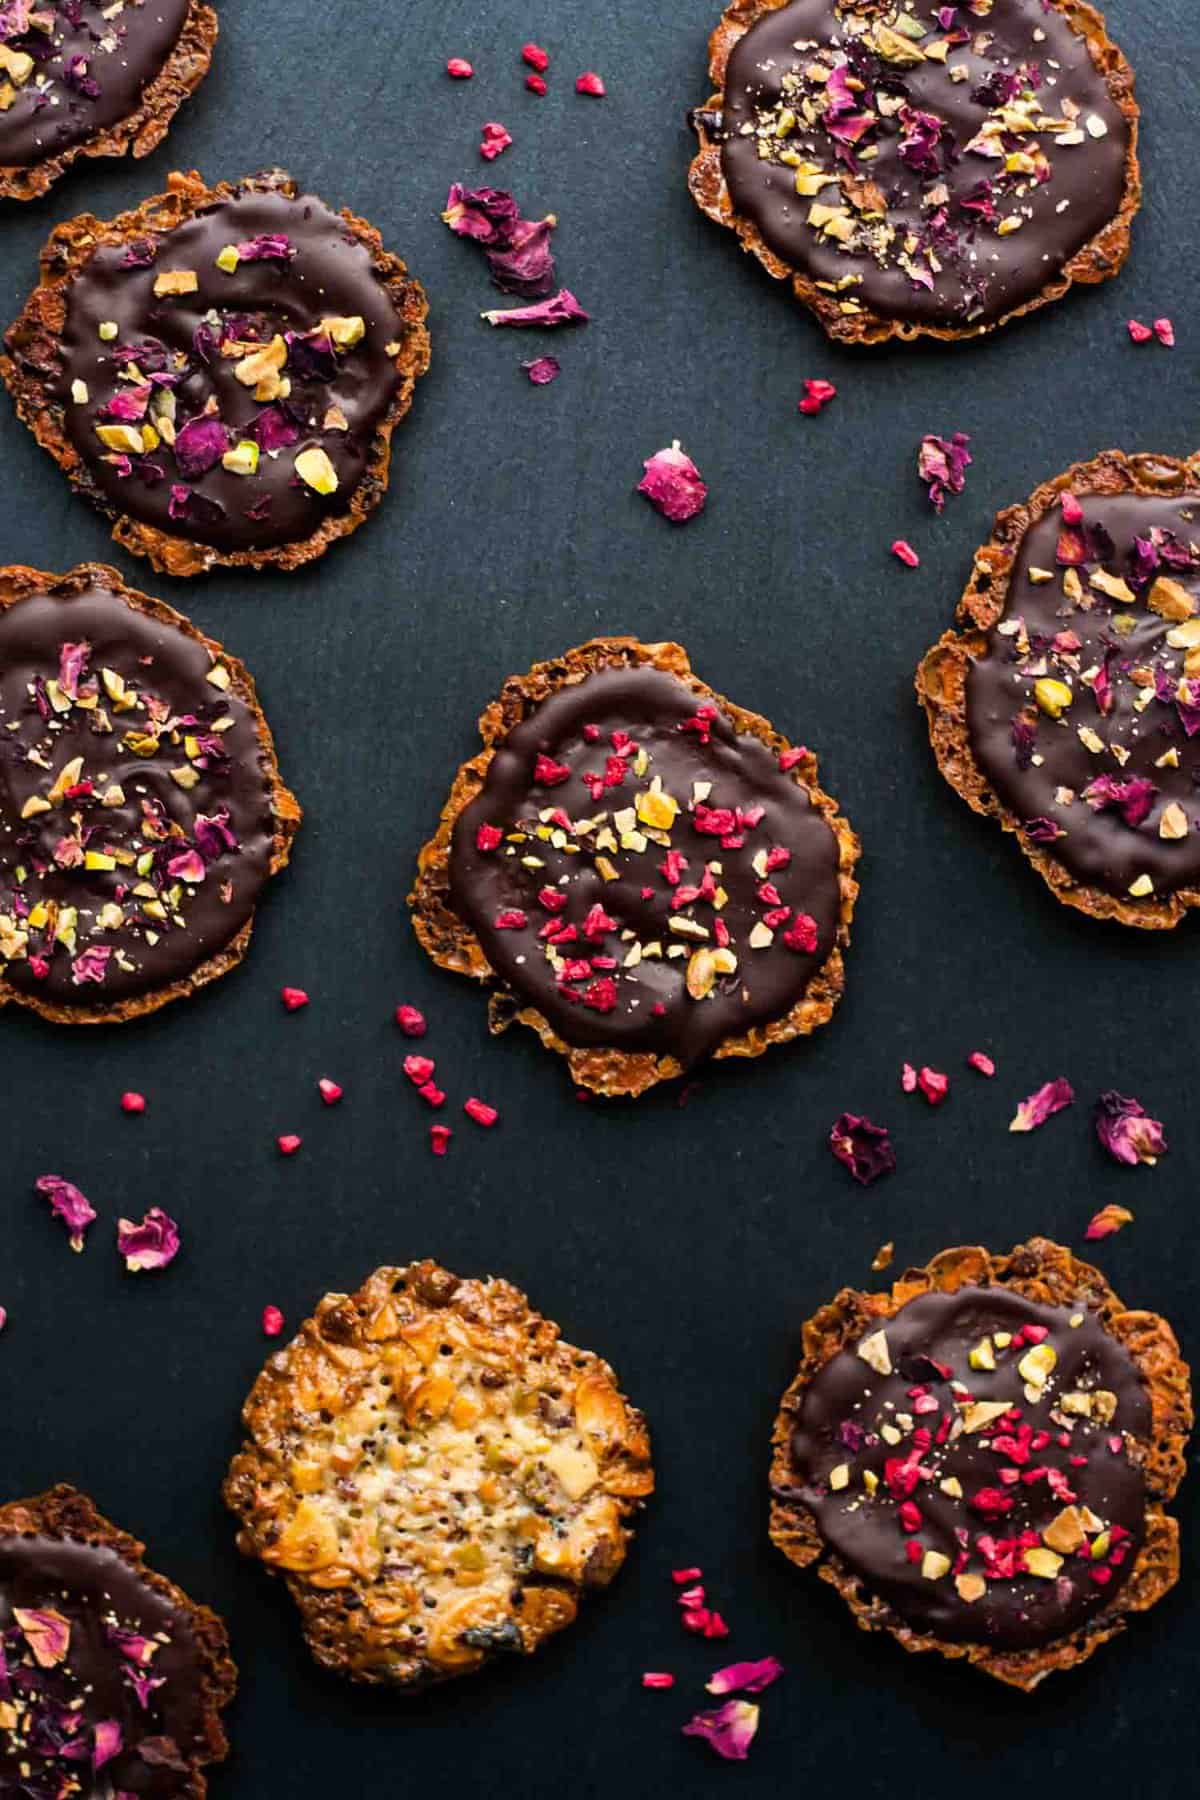 Chocolate almond florentines on a slate background.